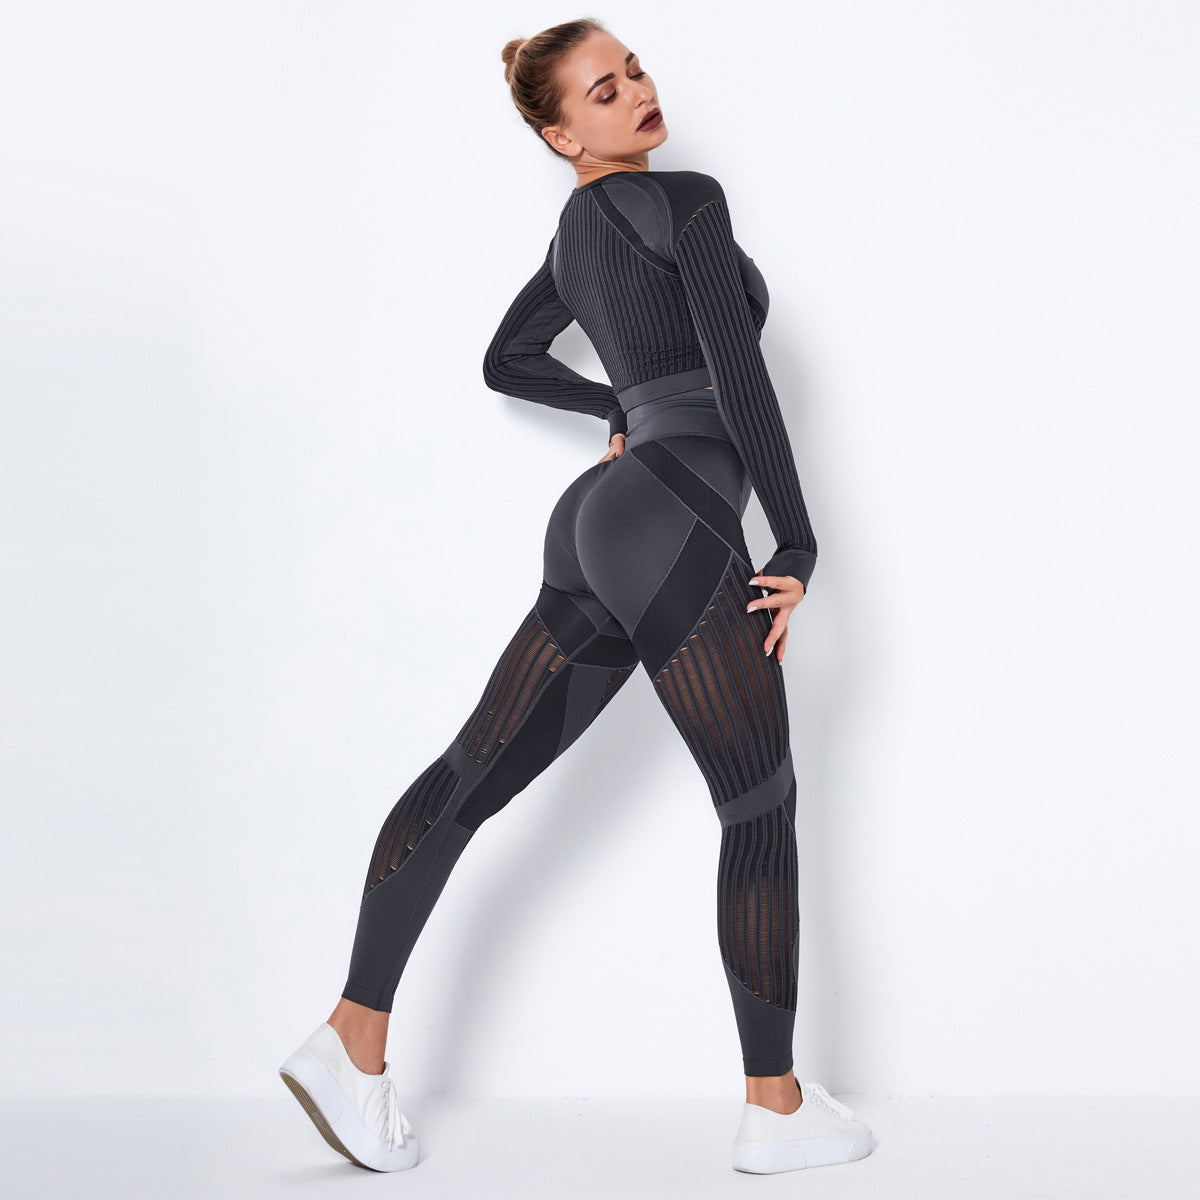 Sexy Hollow Out Long Sleeves Tops and Leggings Sets for Yoga Sporting-Activewear-Light Gray-XS-Free Shipping Leatheretro